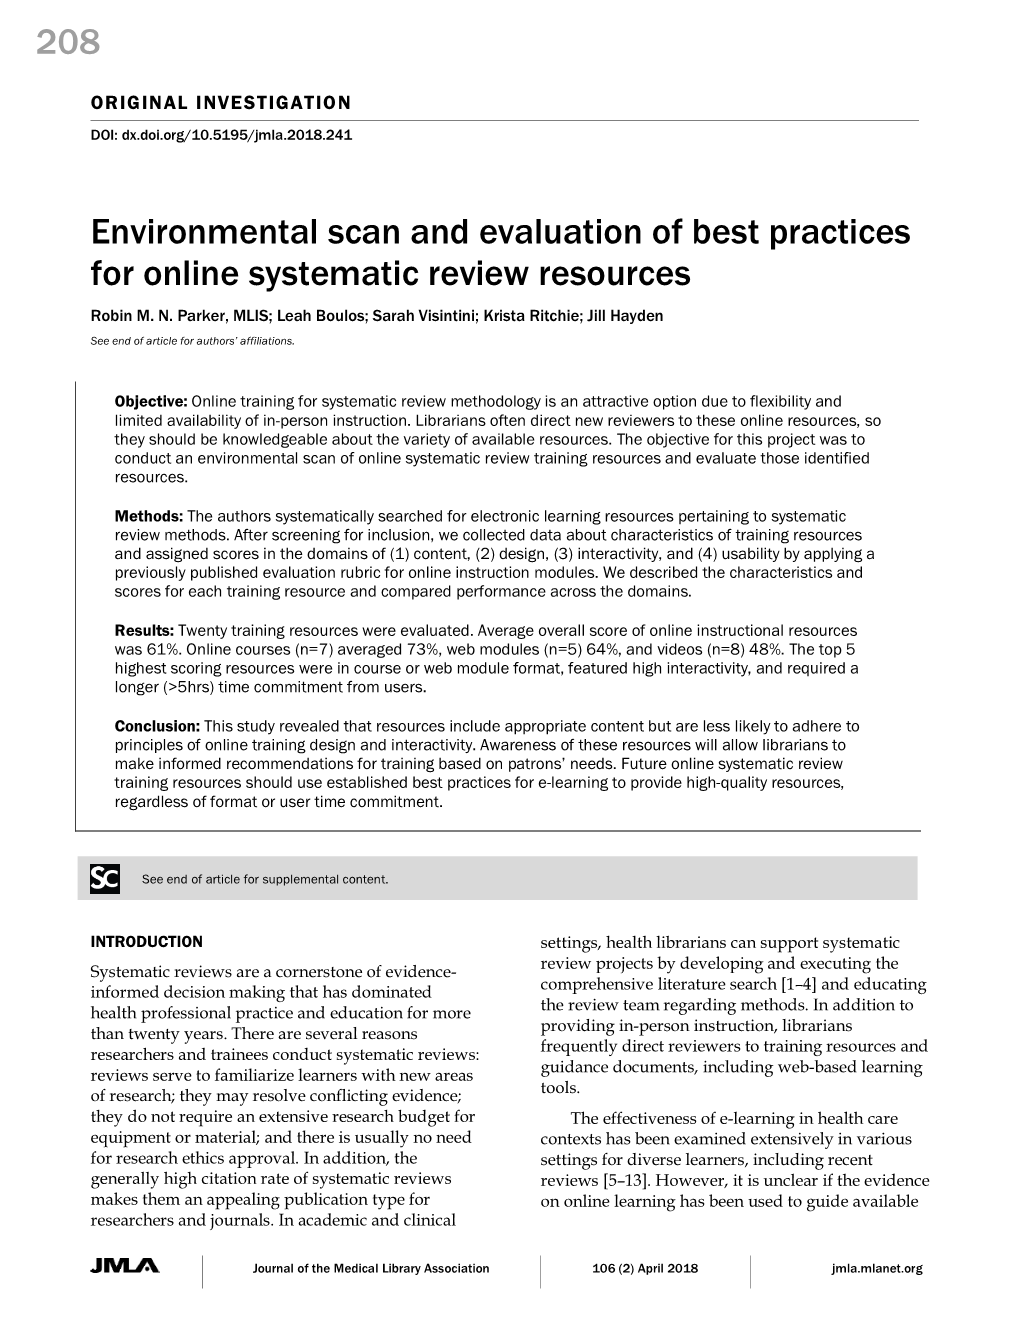 208 Environmental Scan and Evaluation of Best Practices For